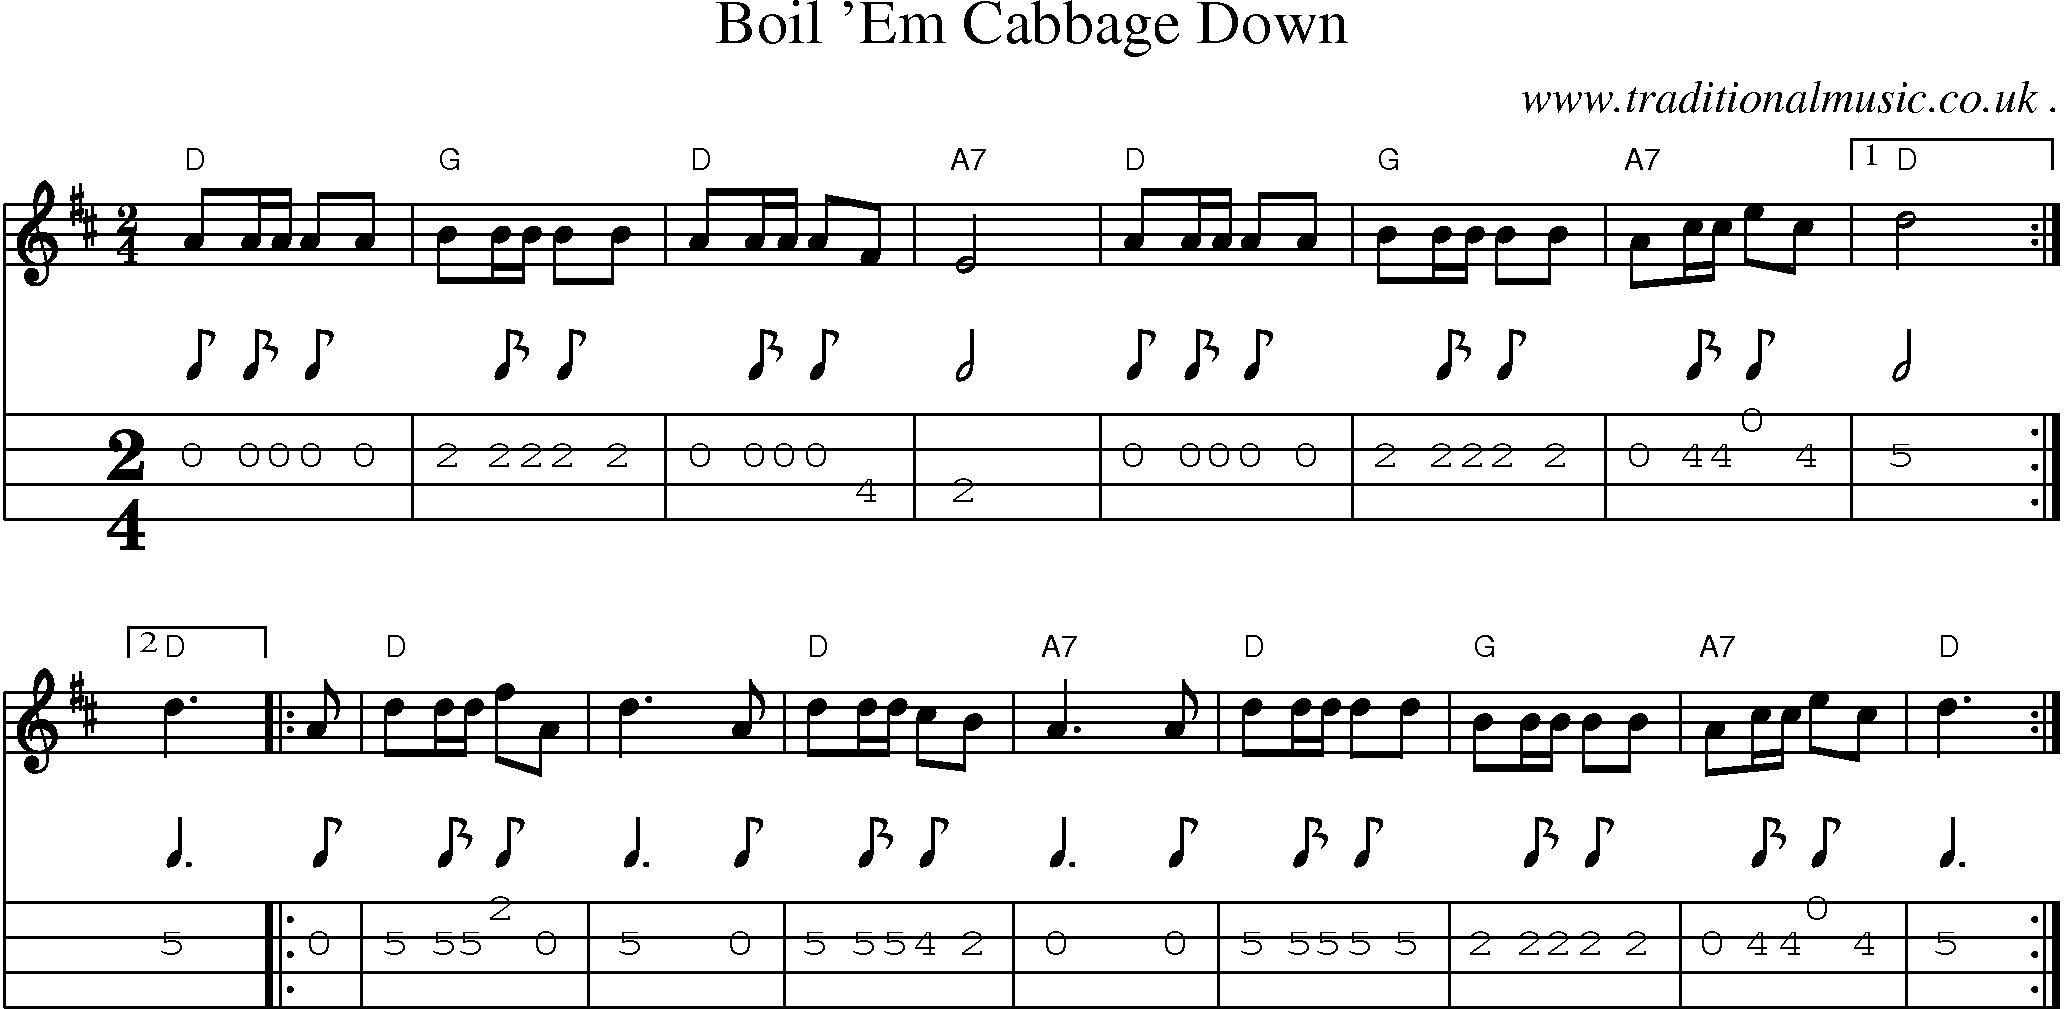 Sheet-Music and Mandolin Tabs for Boil Em Cabbage Down